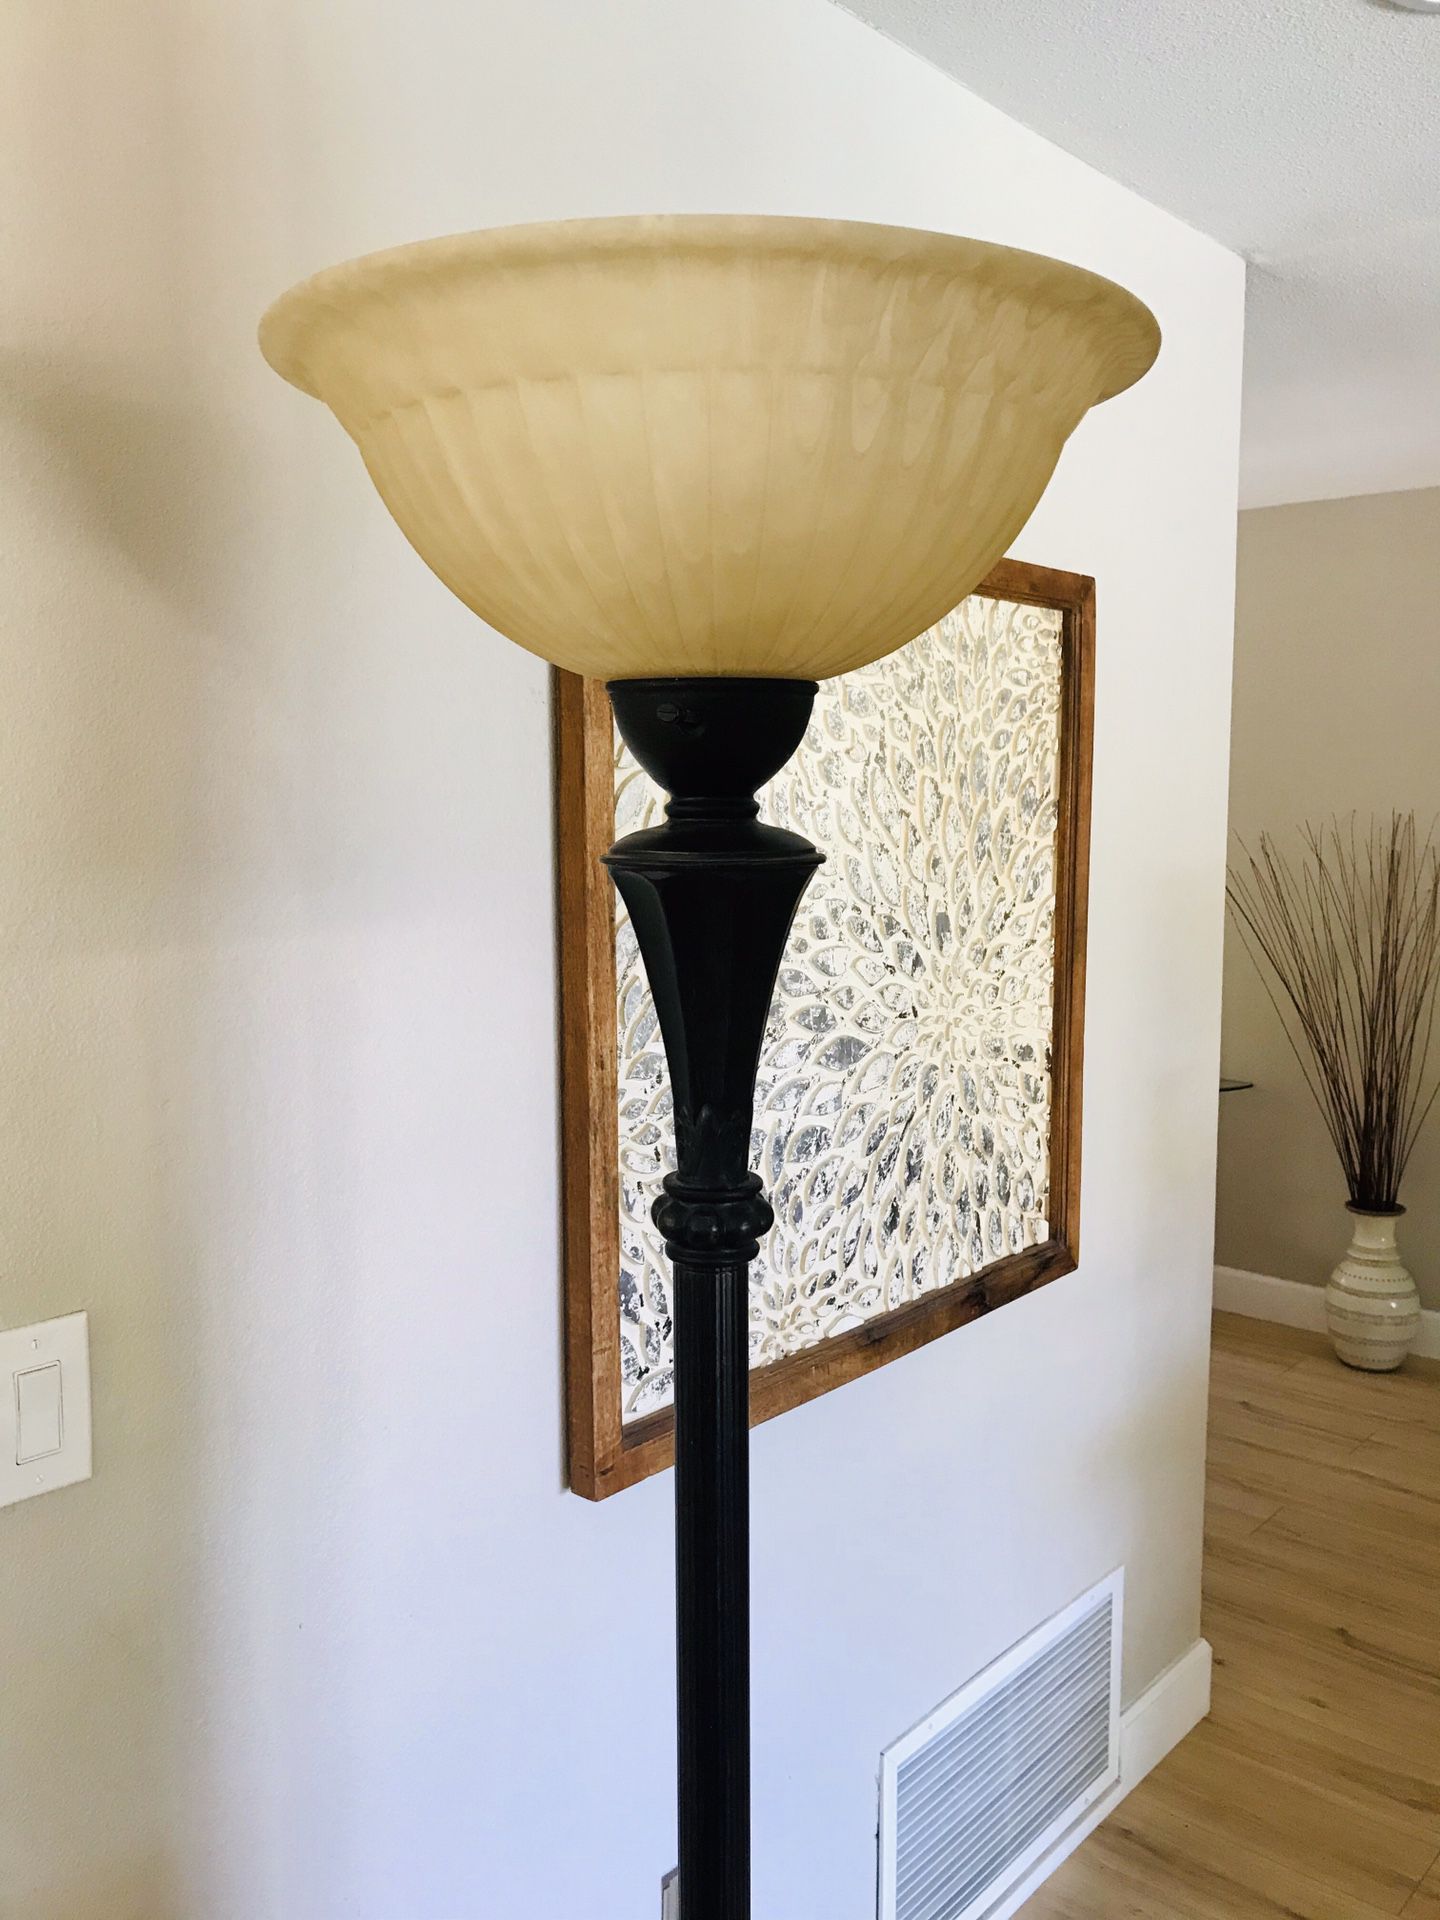 Tall floor lamp with glass bowl